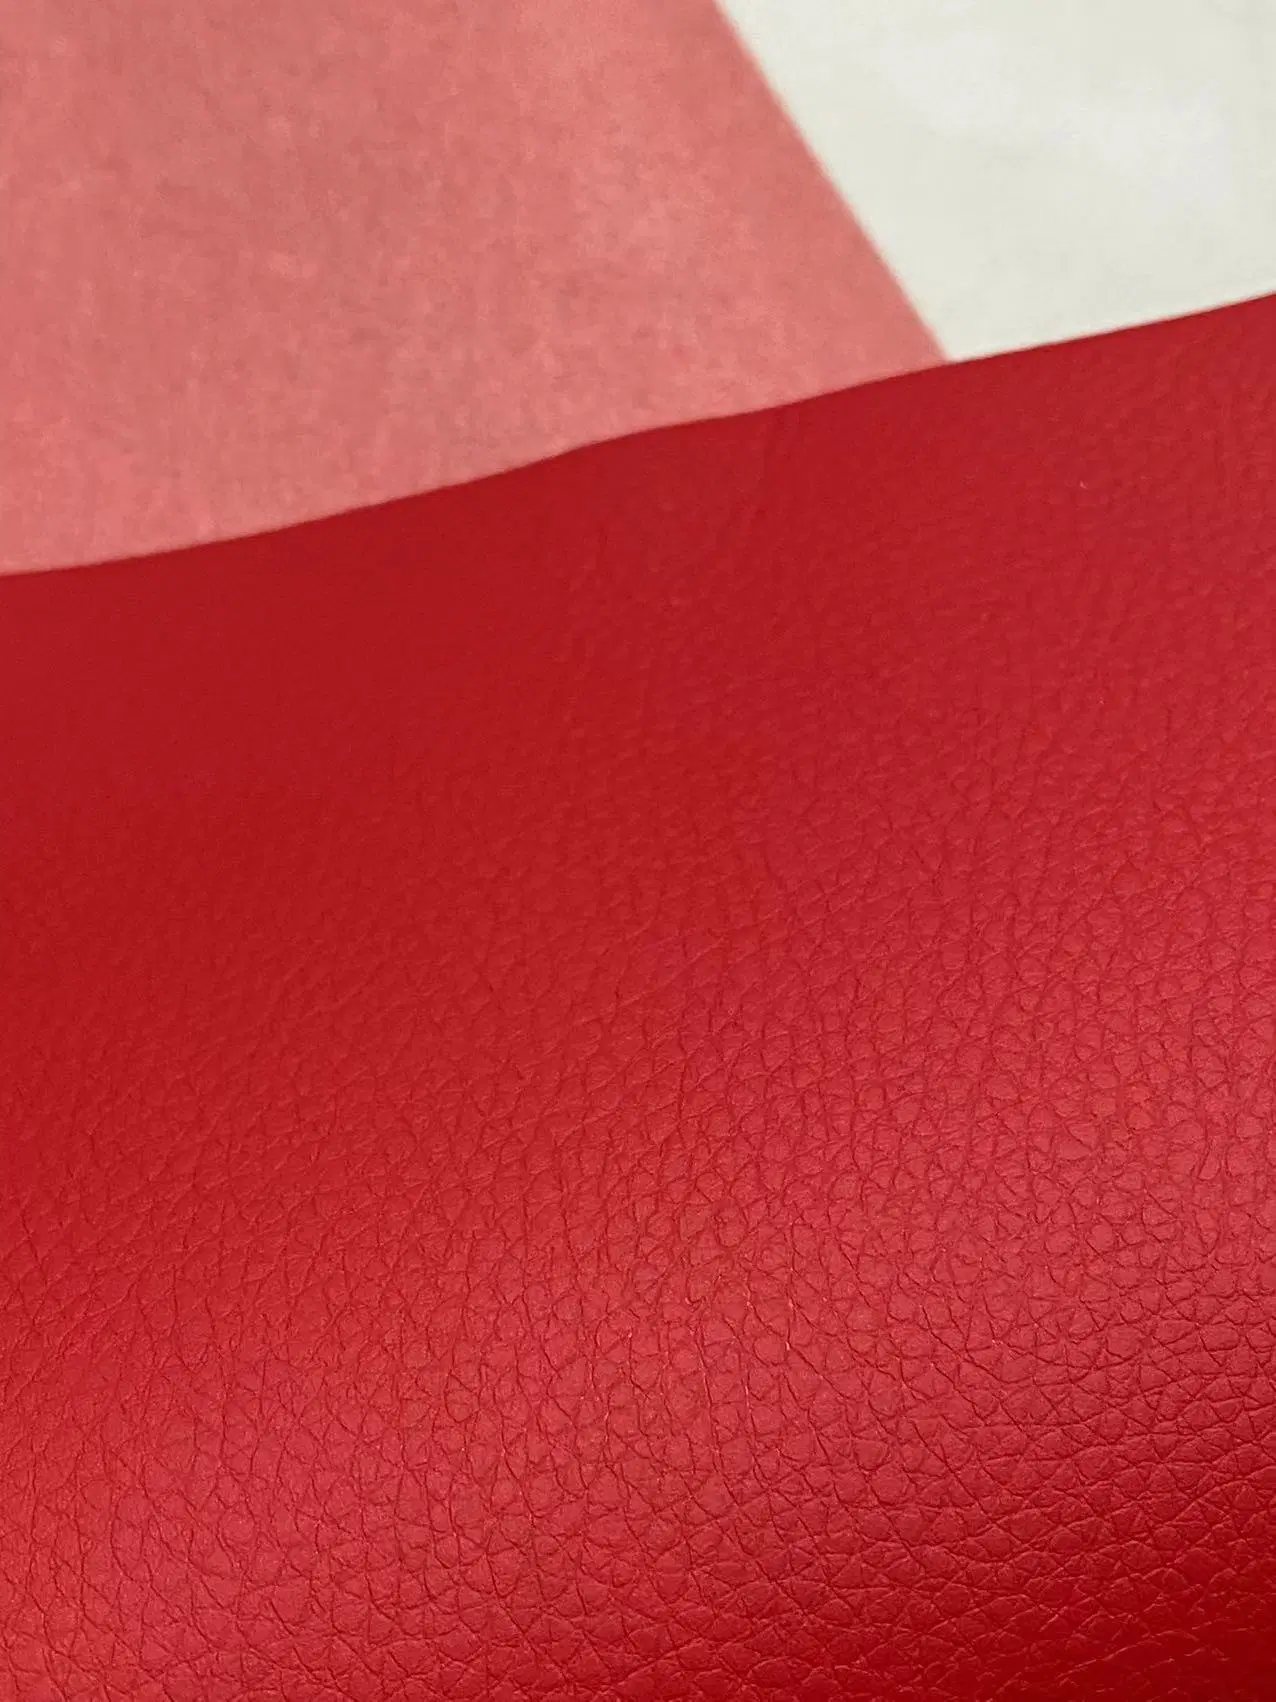 Coated Nylon Fabric Microfibre Leather Huafon High Quality Goods Reinforcement Nonwoven